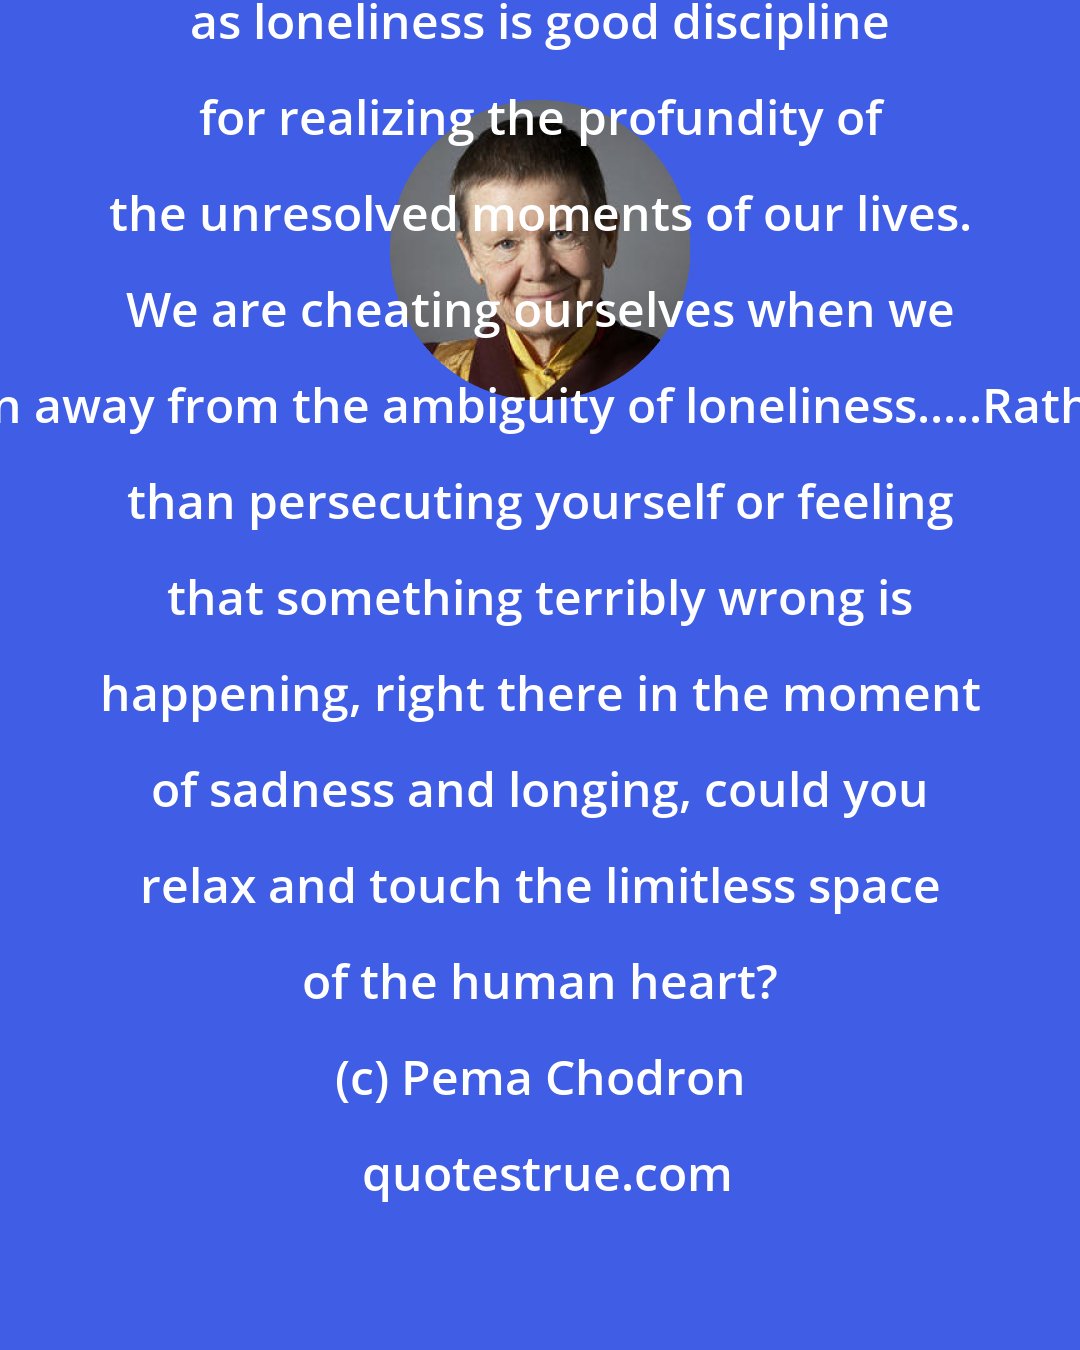 Pema Chodron: Relaxing with something as familiar as loneliness is good discipline for realizing the profundity of the unresolved moments of our lives. We are cheating ourselves when we run away from the ambiguity of loneliness.....Rather than persecuting yourself or feeling that something terribly wrong is happening, right there in the moment of sadness and longing, could you relax and touch the limitless space of the human heart?